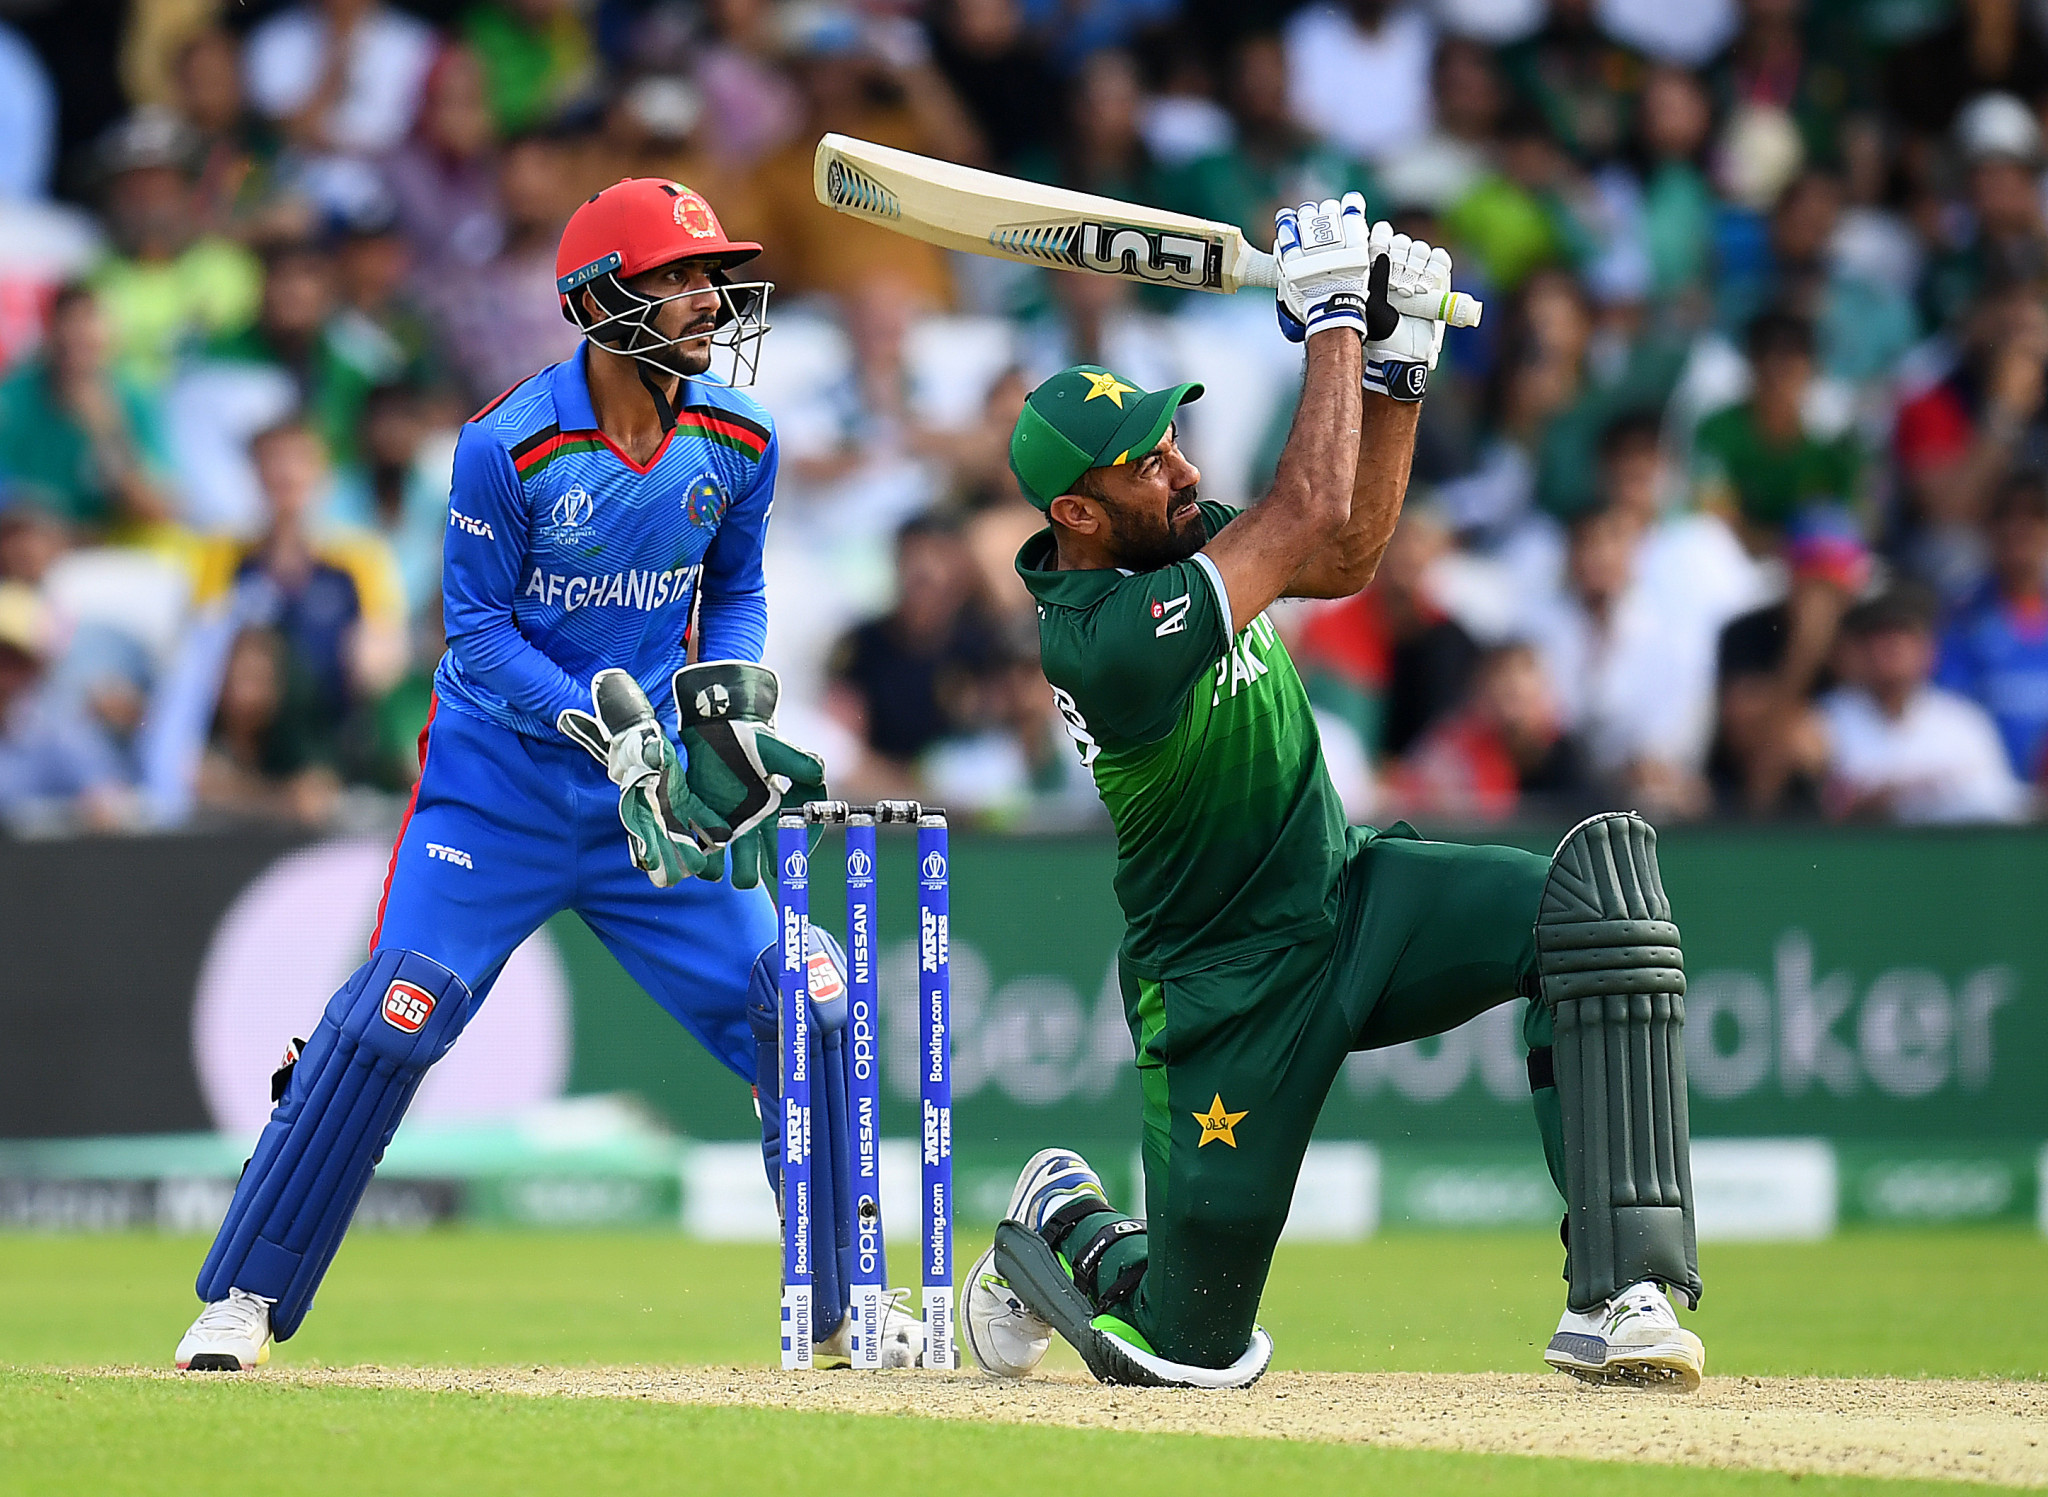 Thrilling Pakistan victory over Afghanistan puts pressure on England at ICC Cricket World Cup